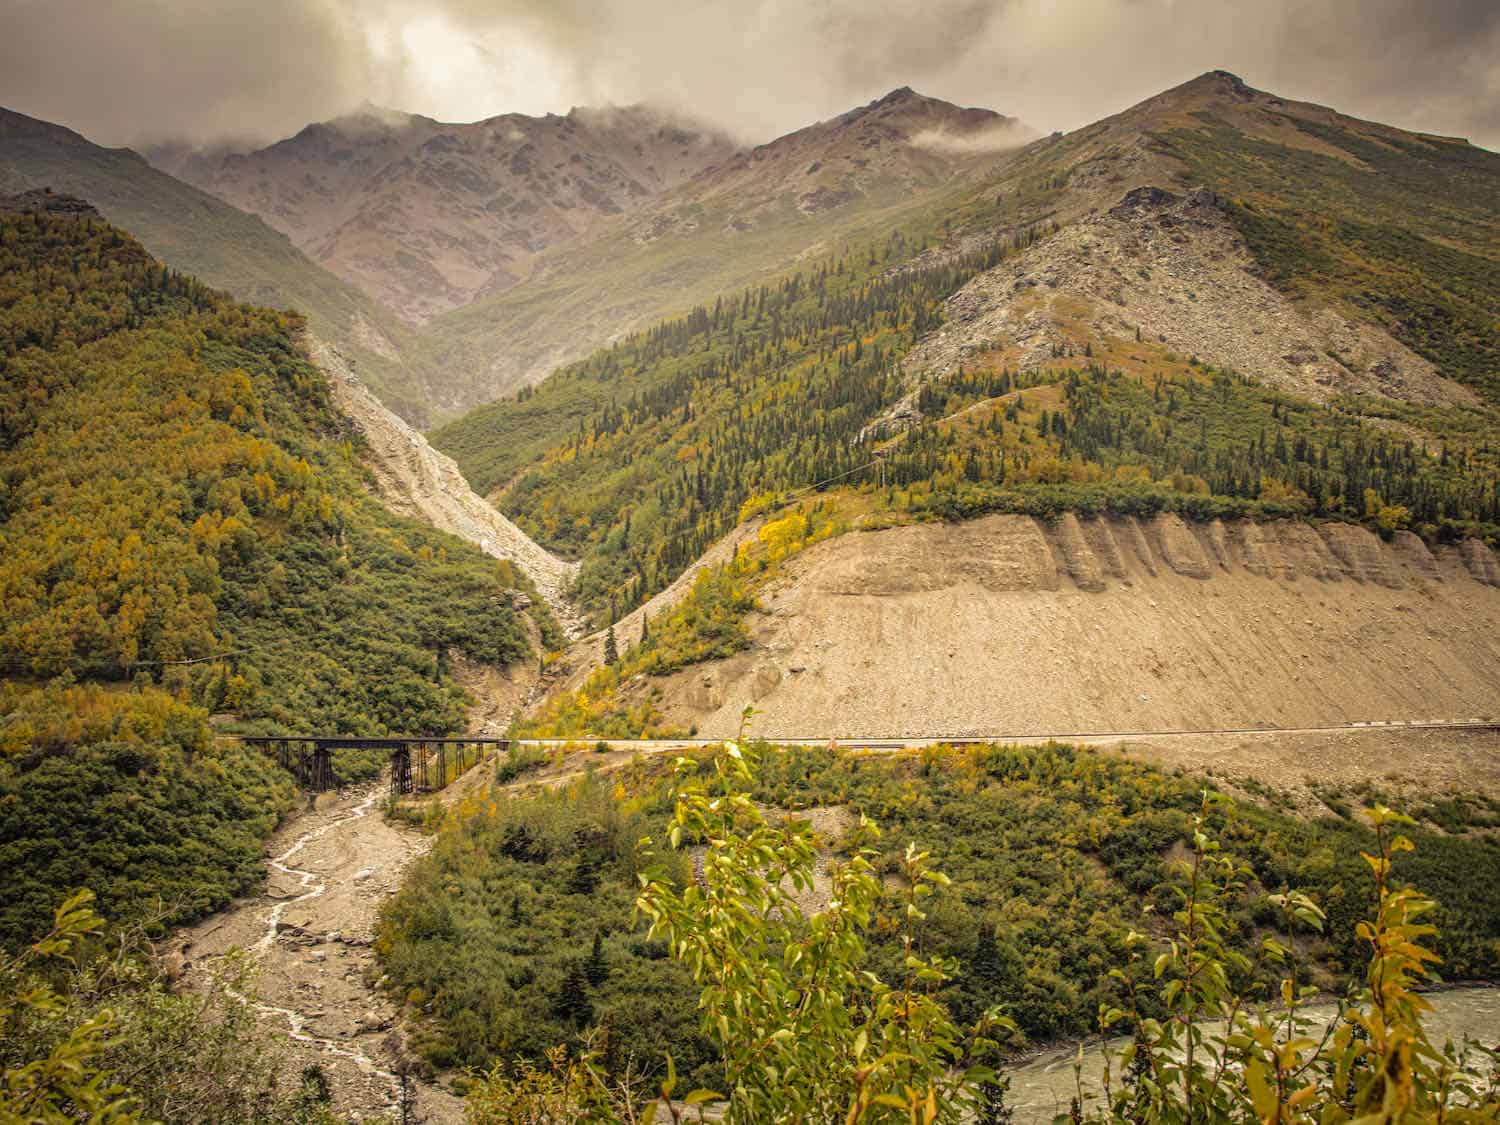 rugged mountains with green trees, train trestle near bottom of phto